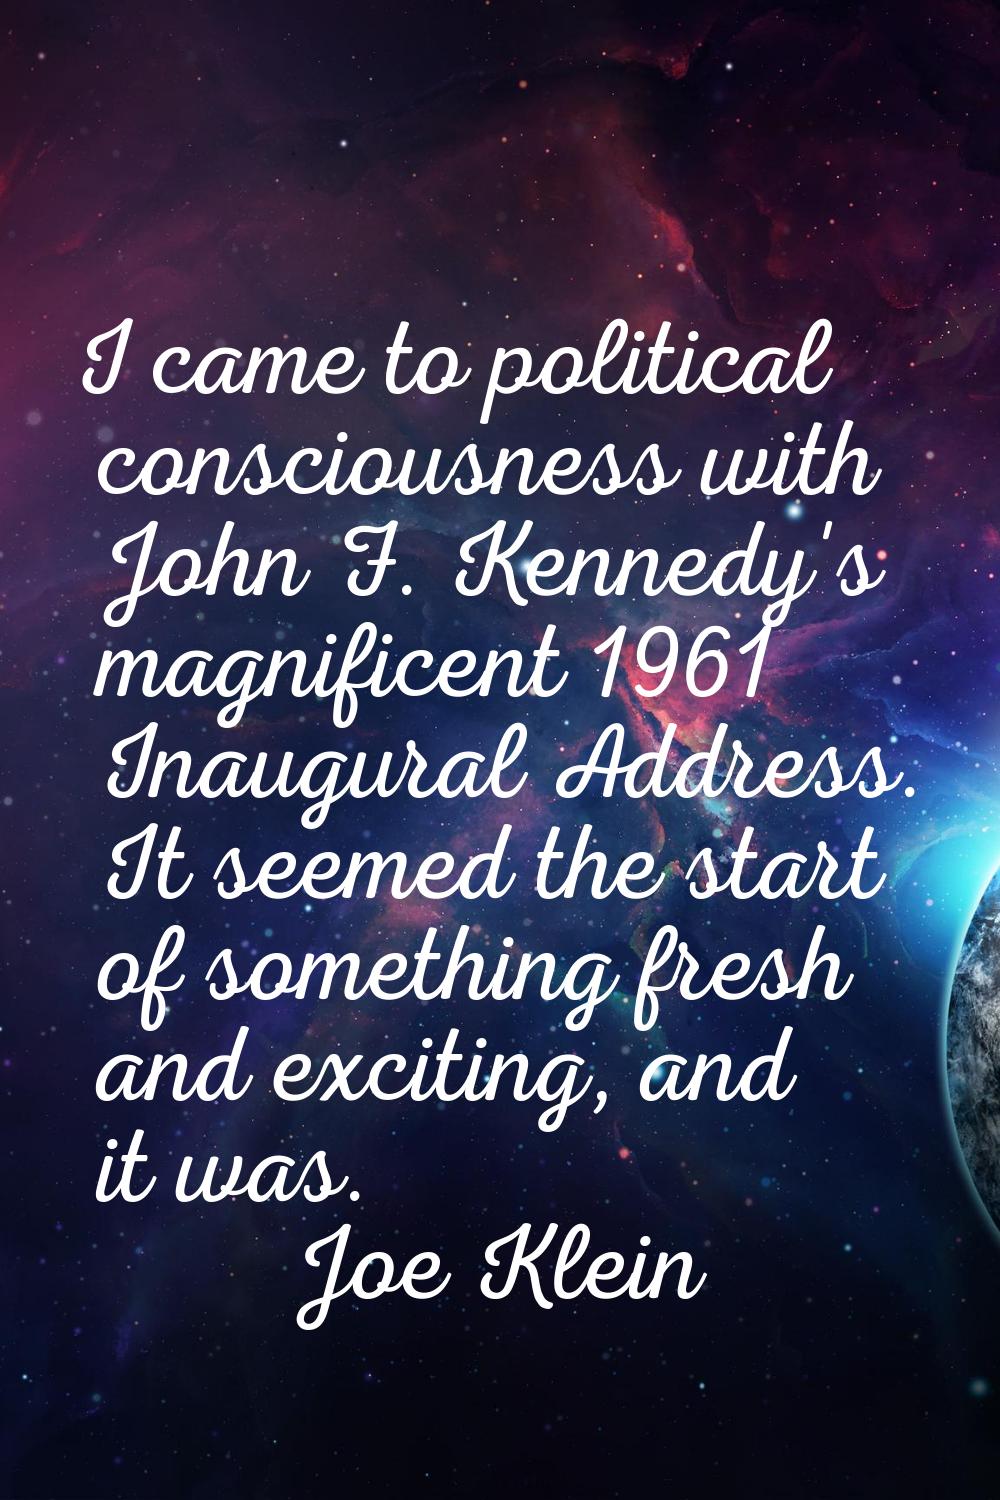 I came to political consciousness with John F. Kennedy's magnificent 1961 Inaugural Address. It see